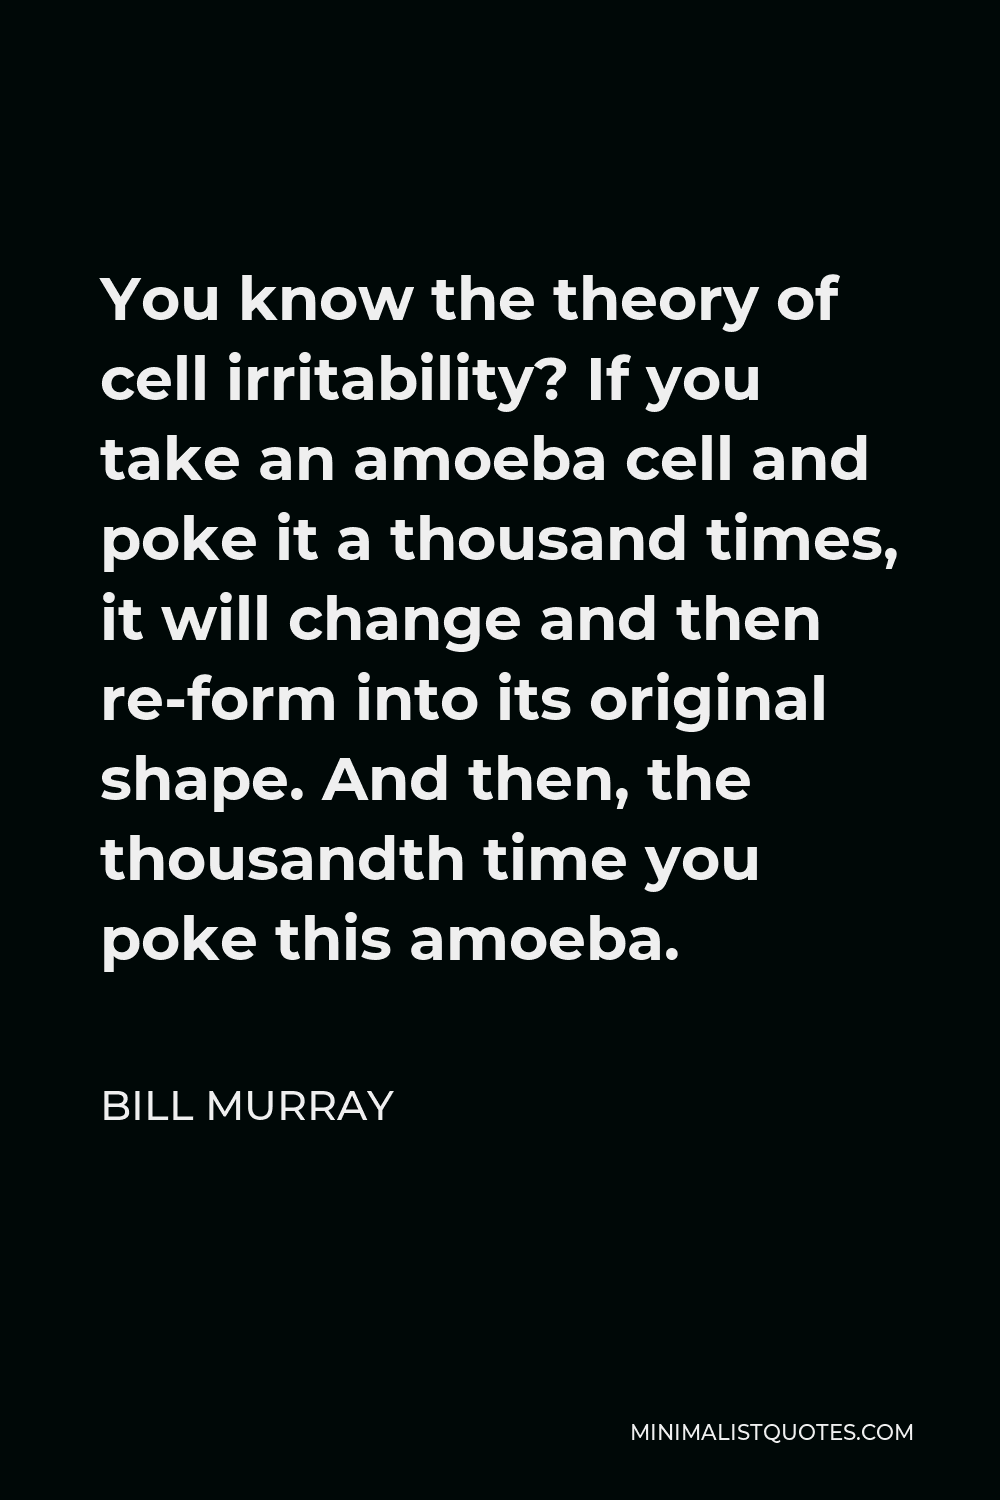 Bill Murray Quote - You know the theory of cell irritability? If you take an amoeba cell and poke it a thousand times, it will change and then re-form into its original shape. And then, the thousandth time you poke this amoeba.